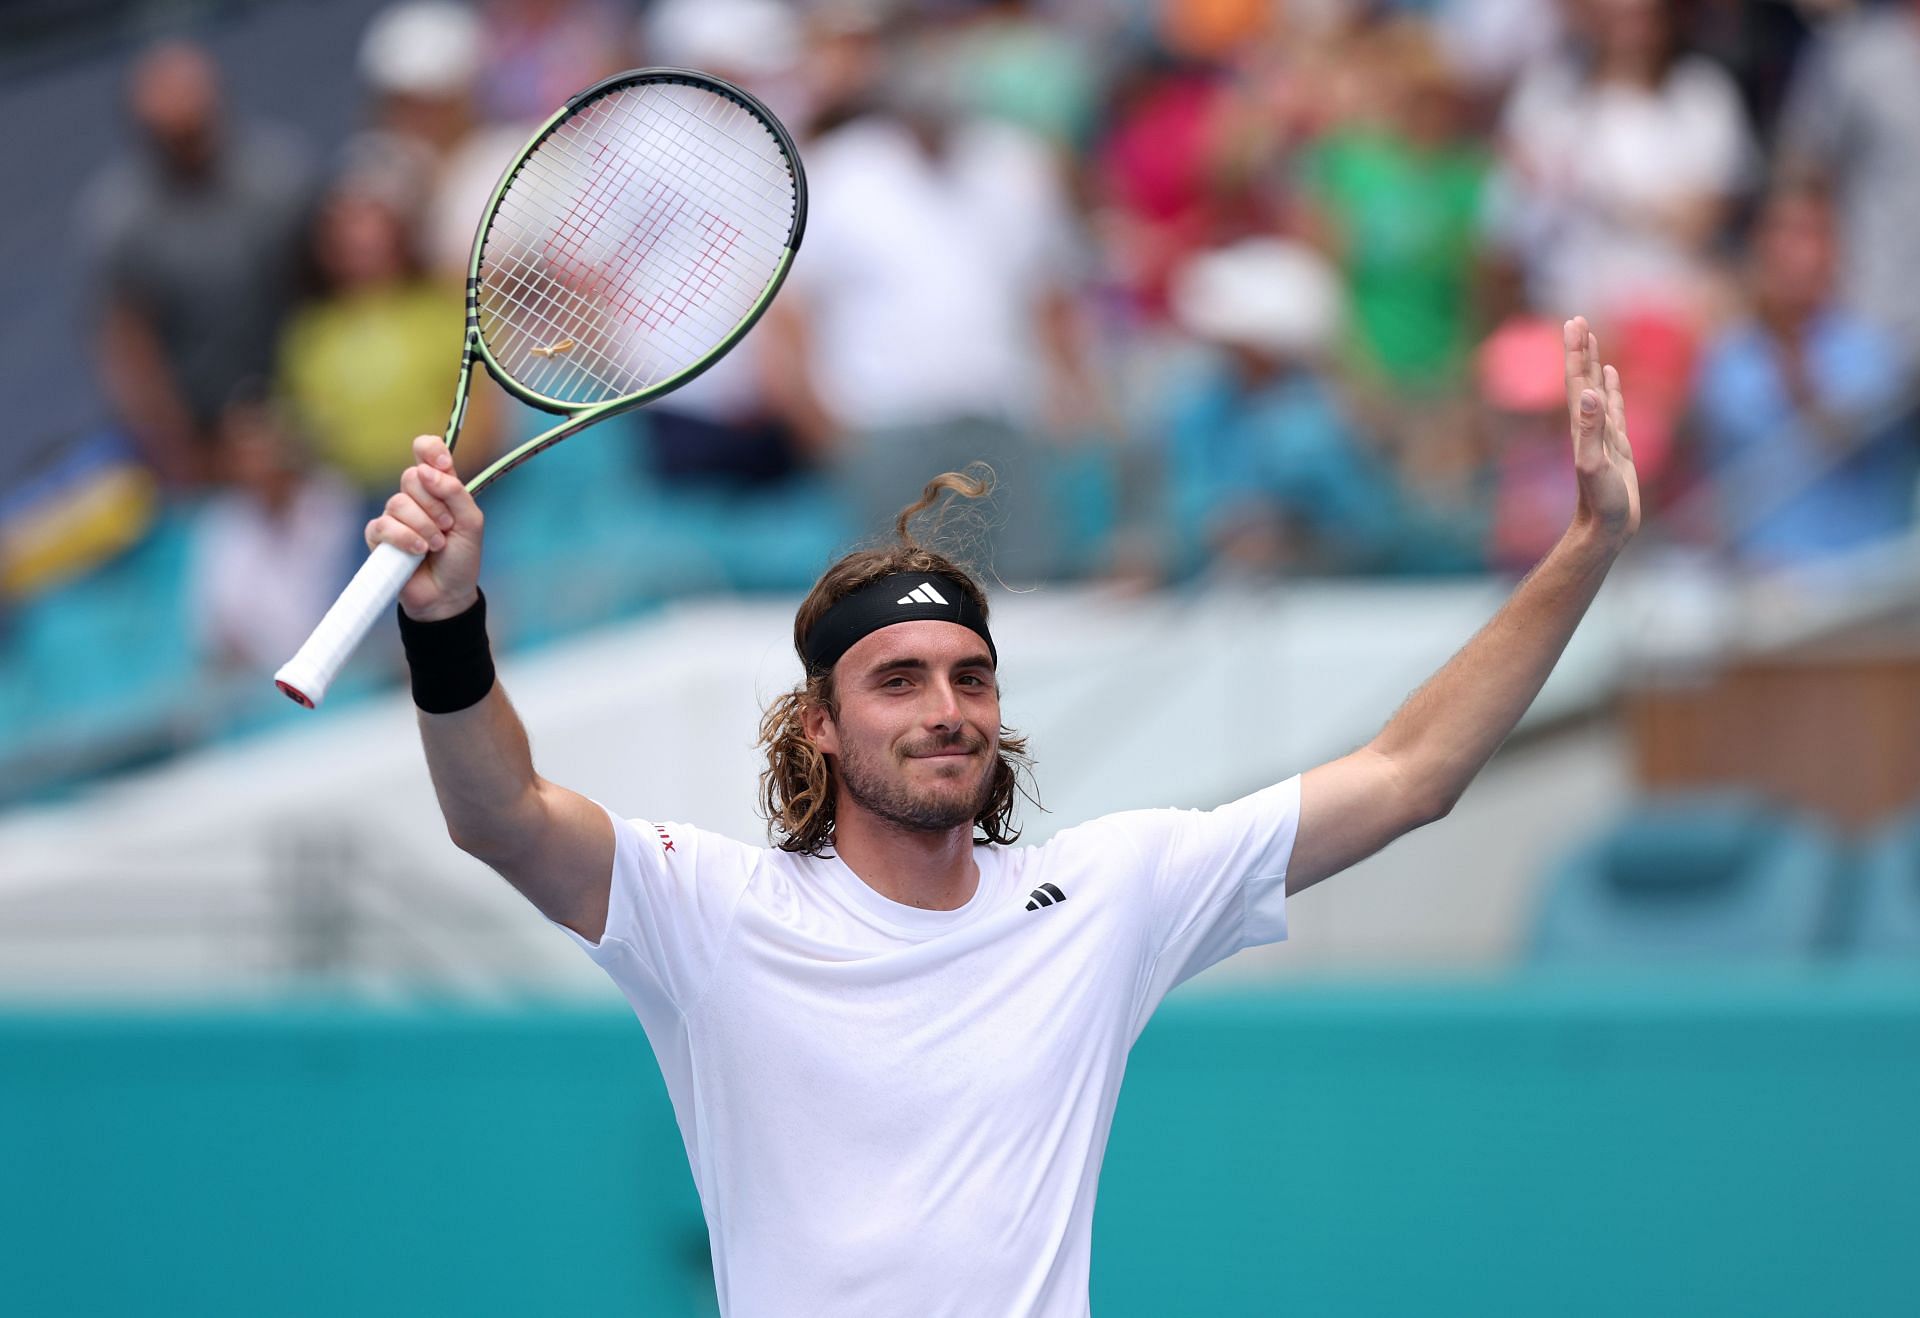 Tsitsipas is looking to go deep in Miami.